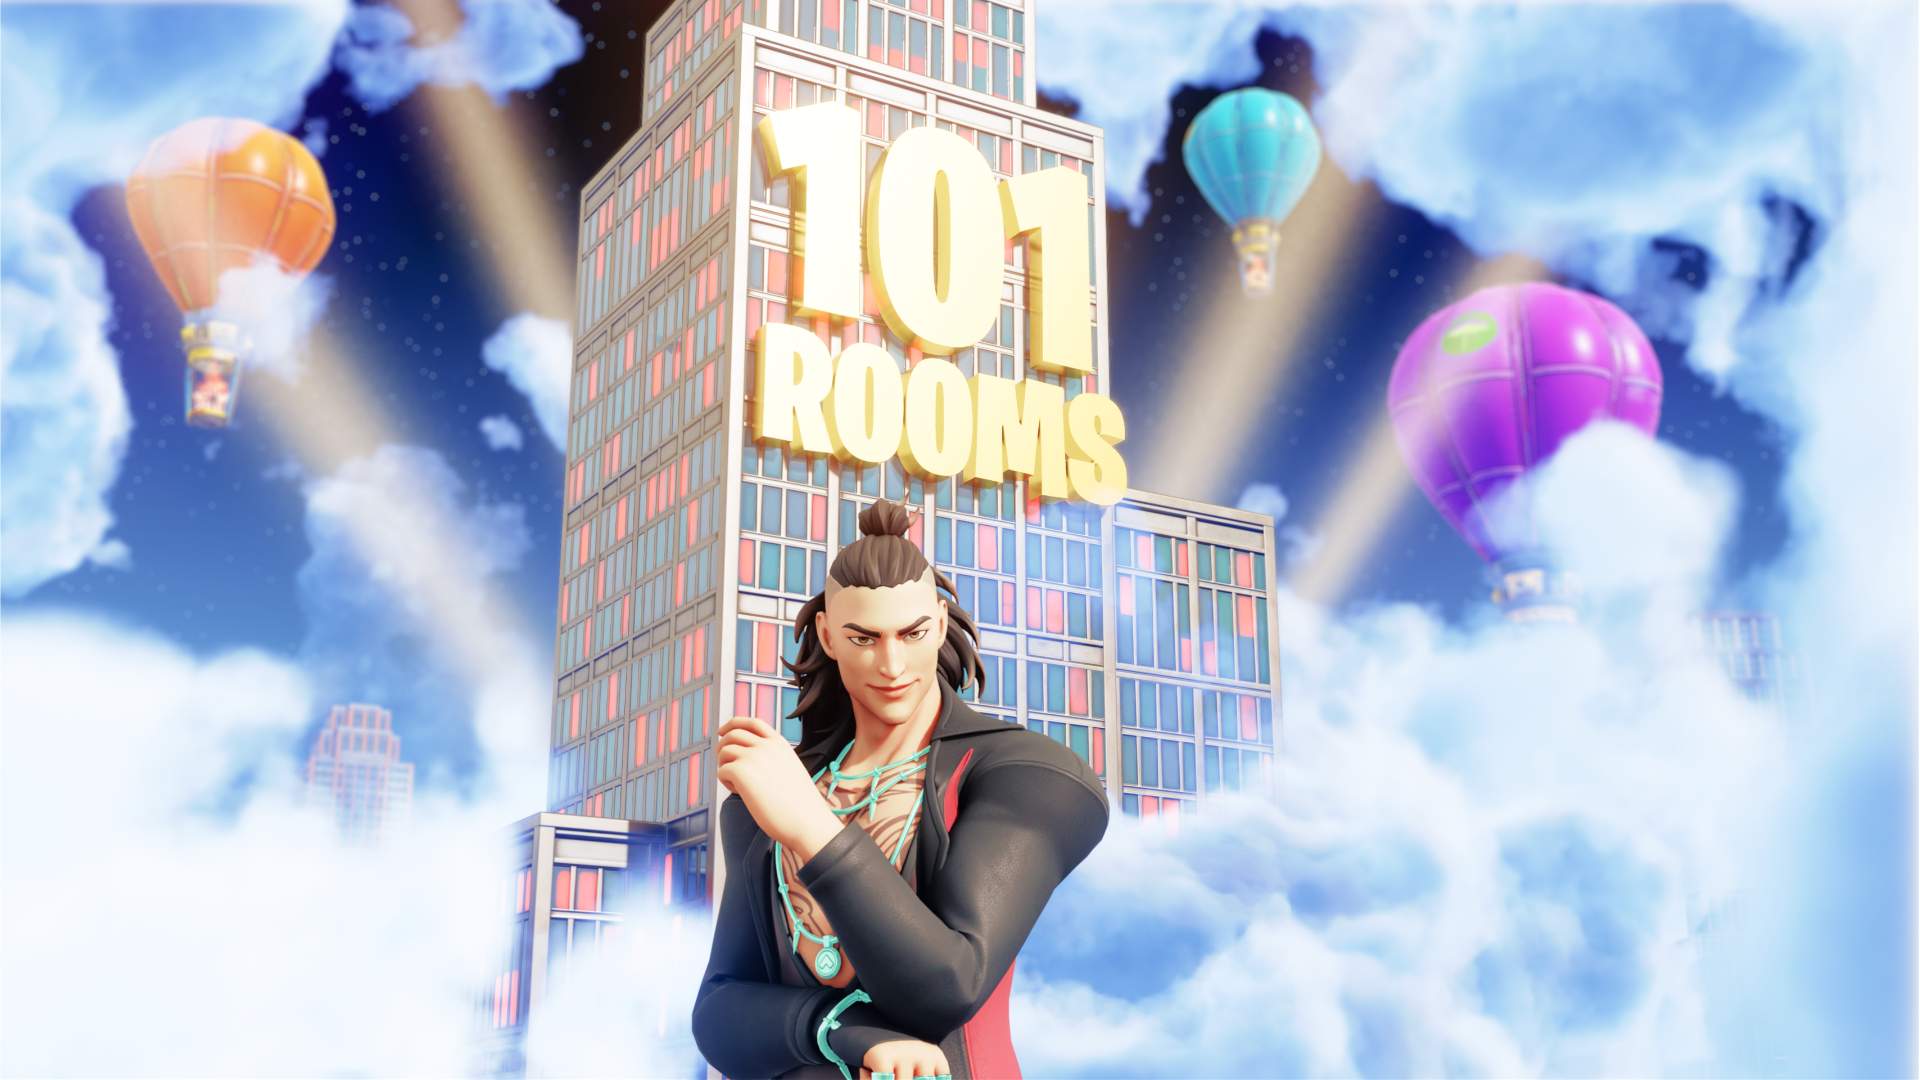 101 Rooms